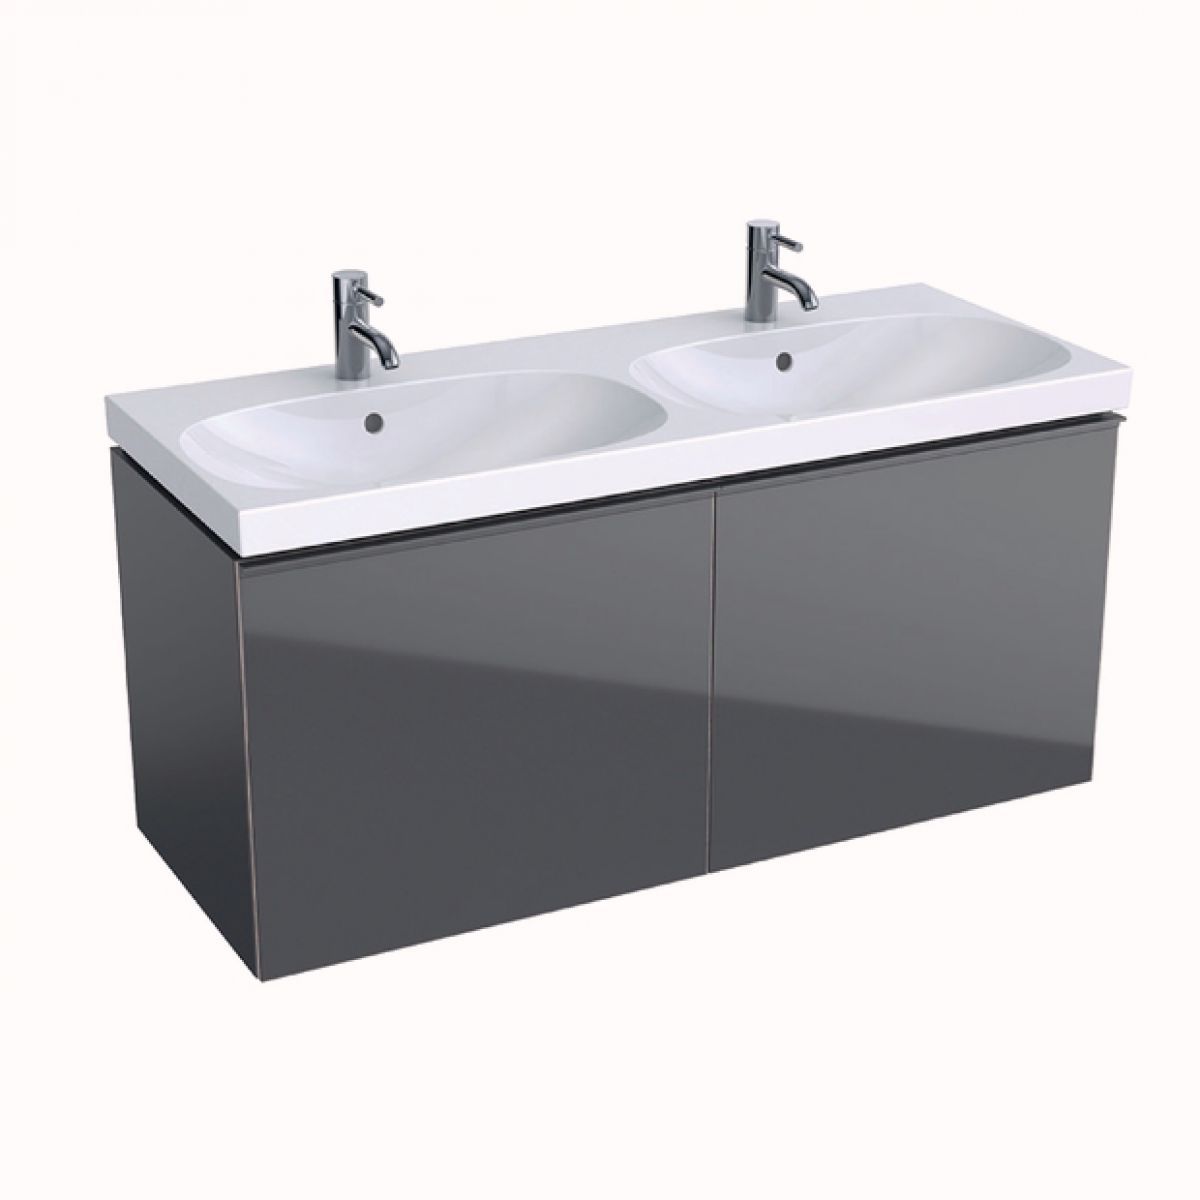 Geberit Acanto 1200mm Double Vanity Unit With Drawers